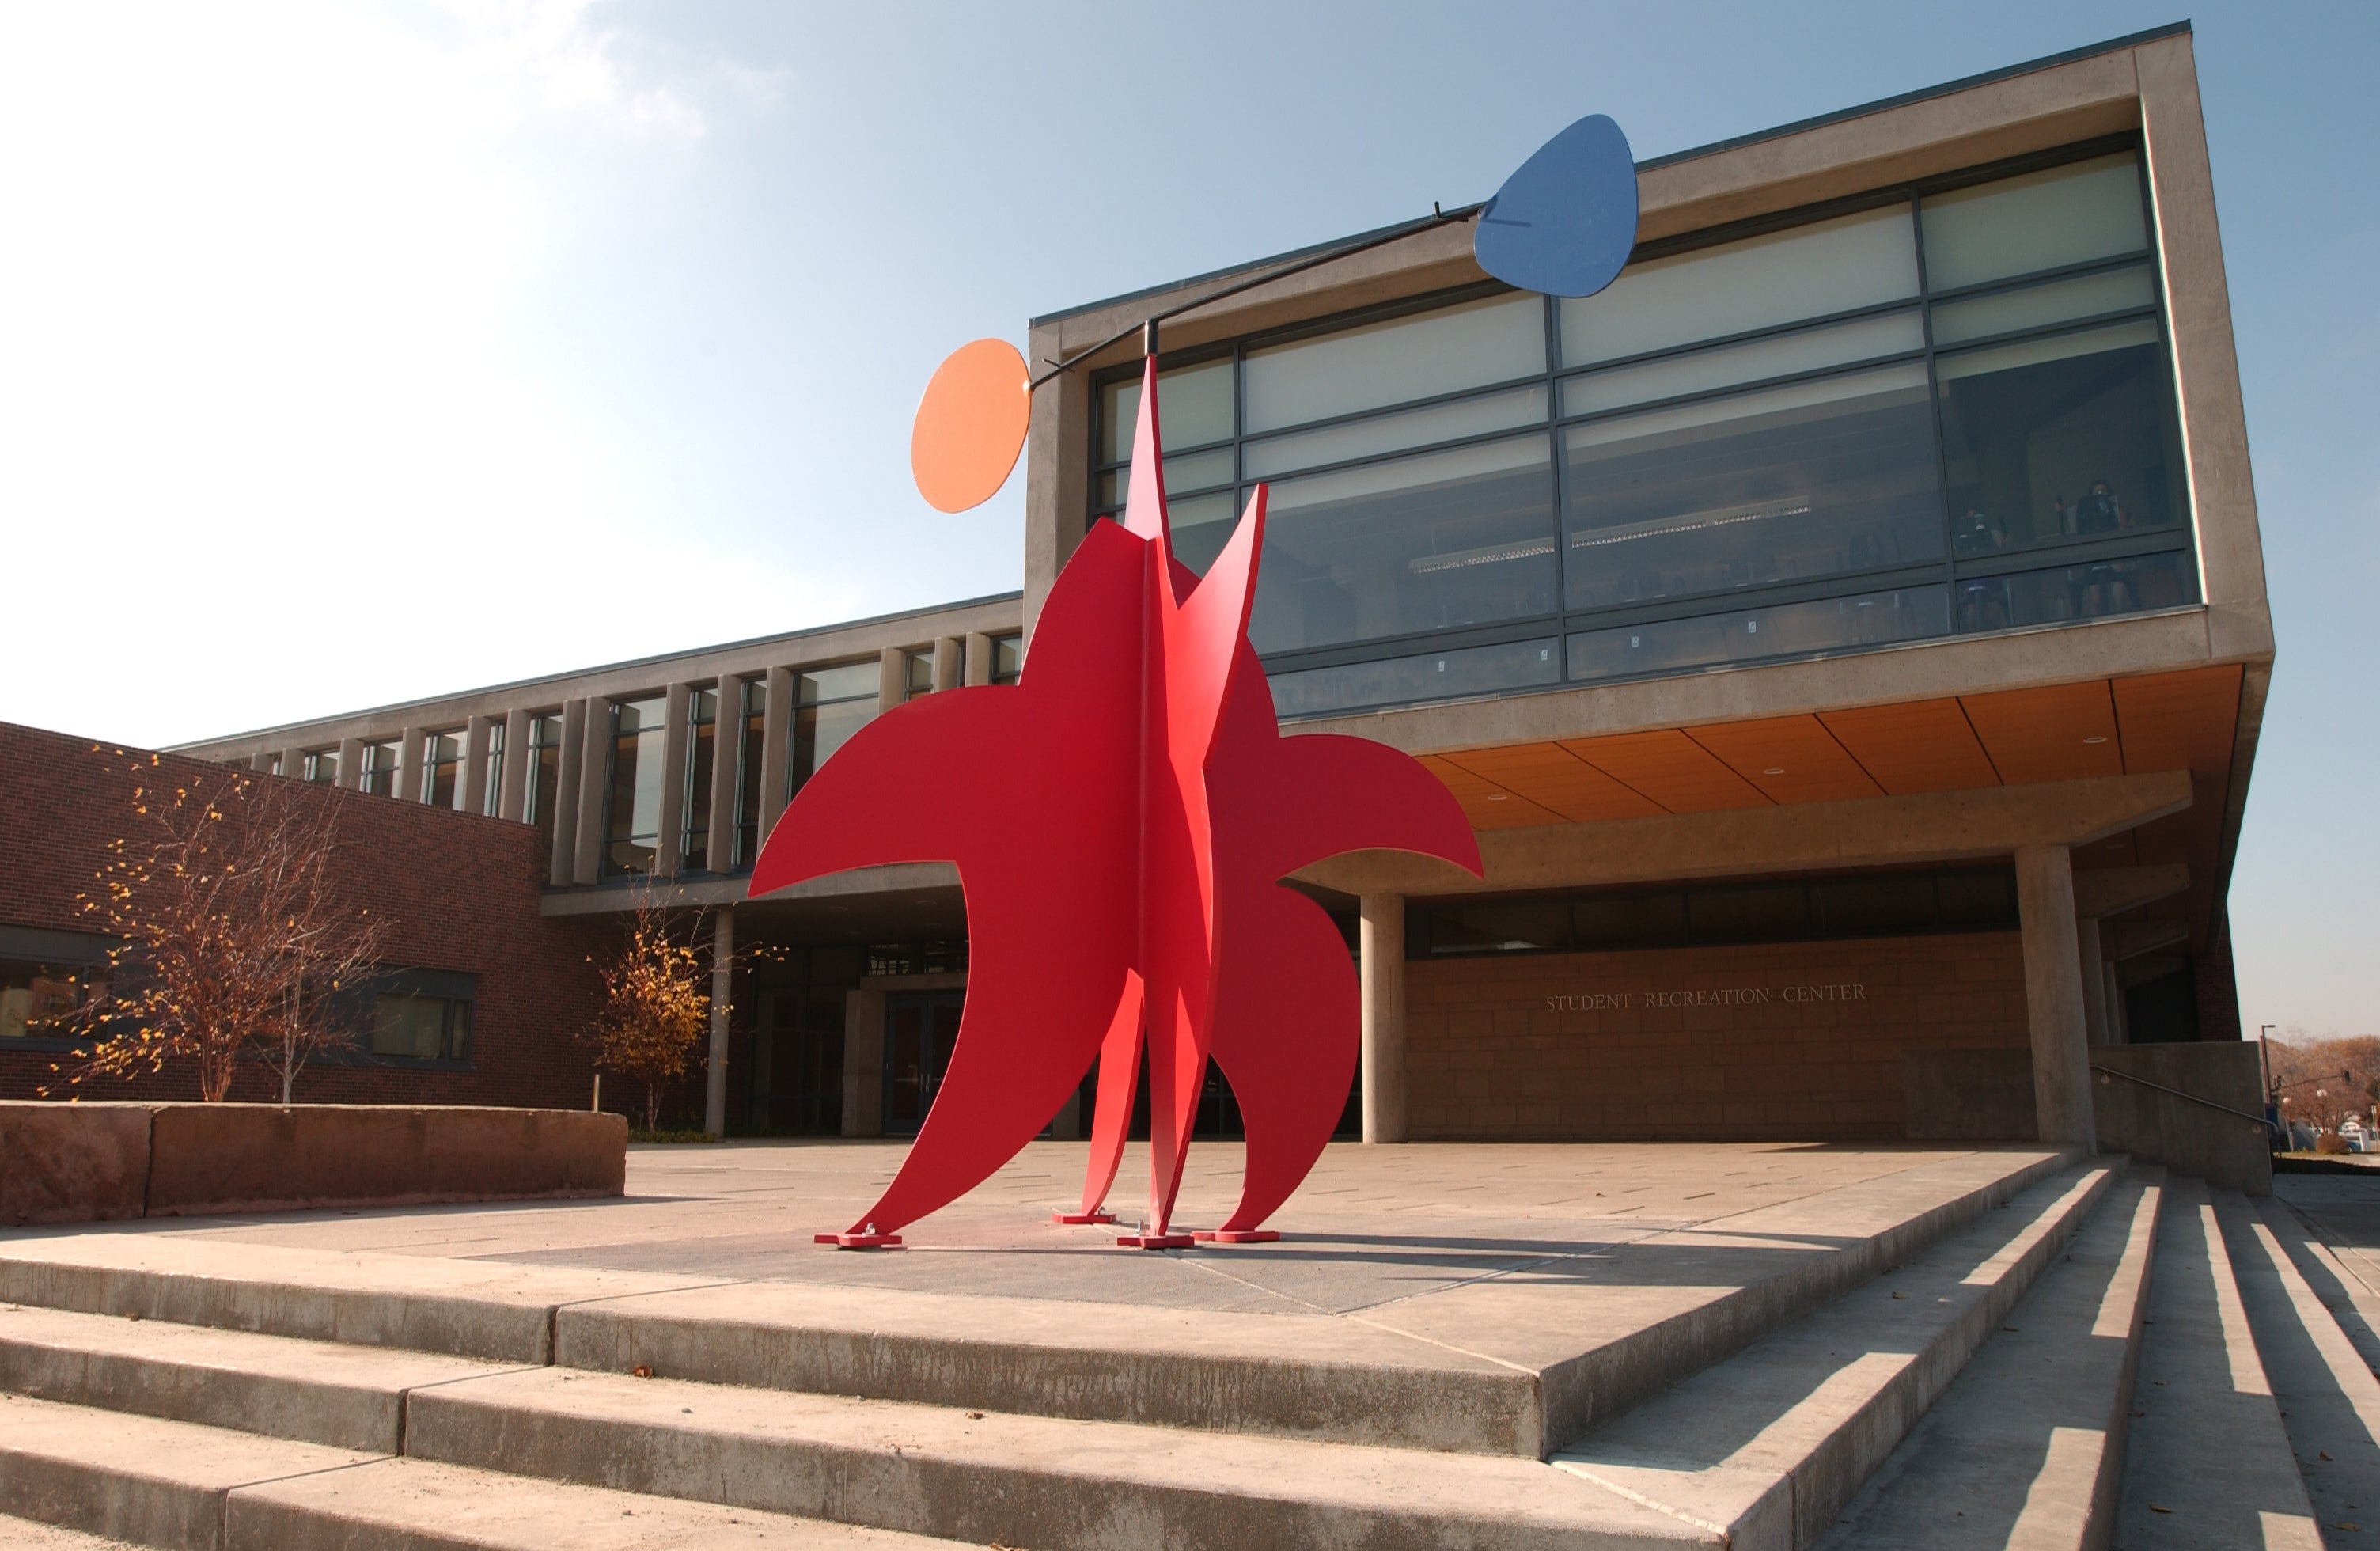 Red sculpture in the shape of a star with orange and blue shapes balancing on top of it.